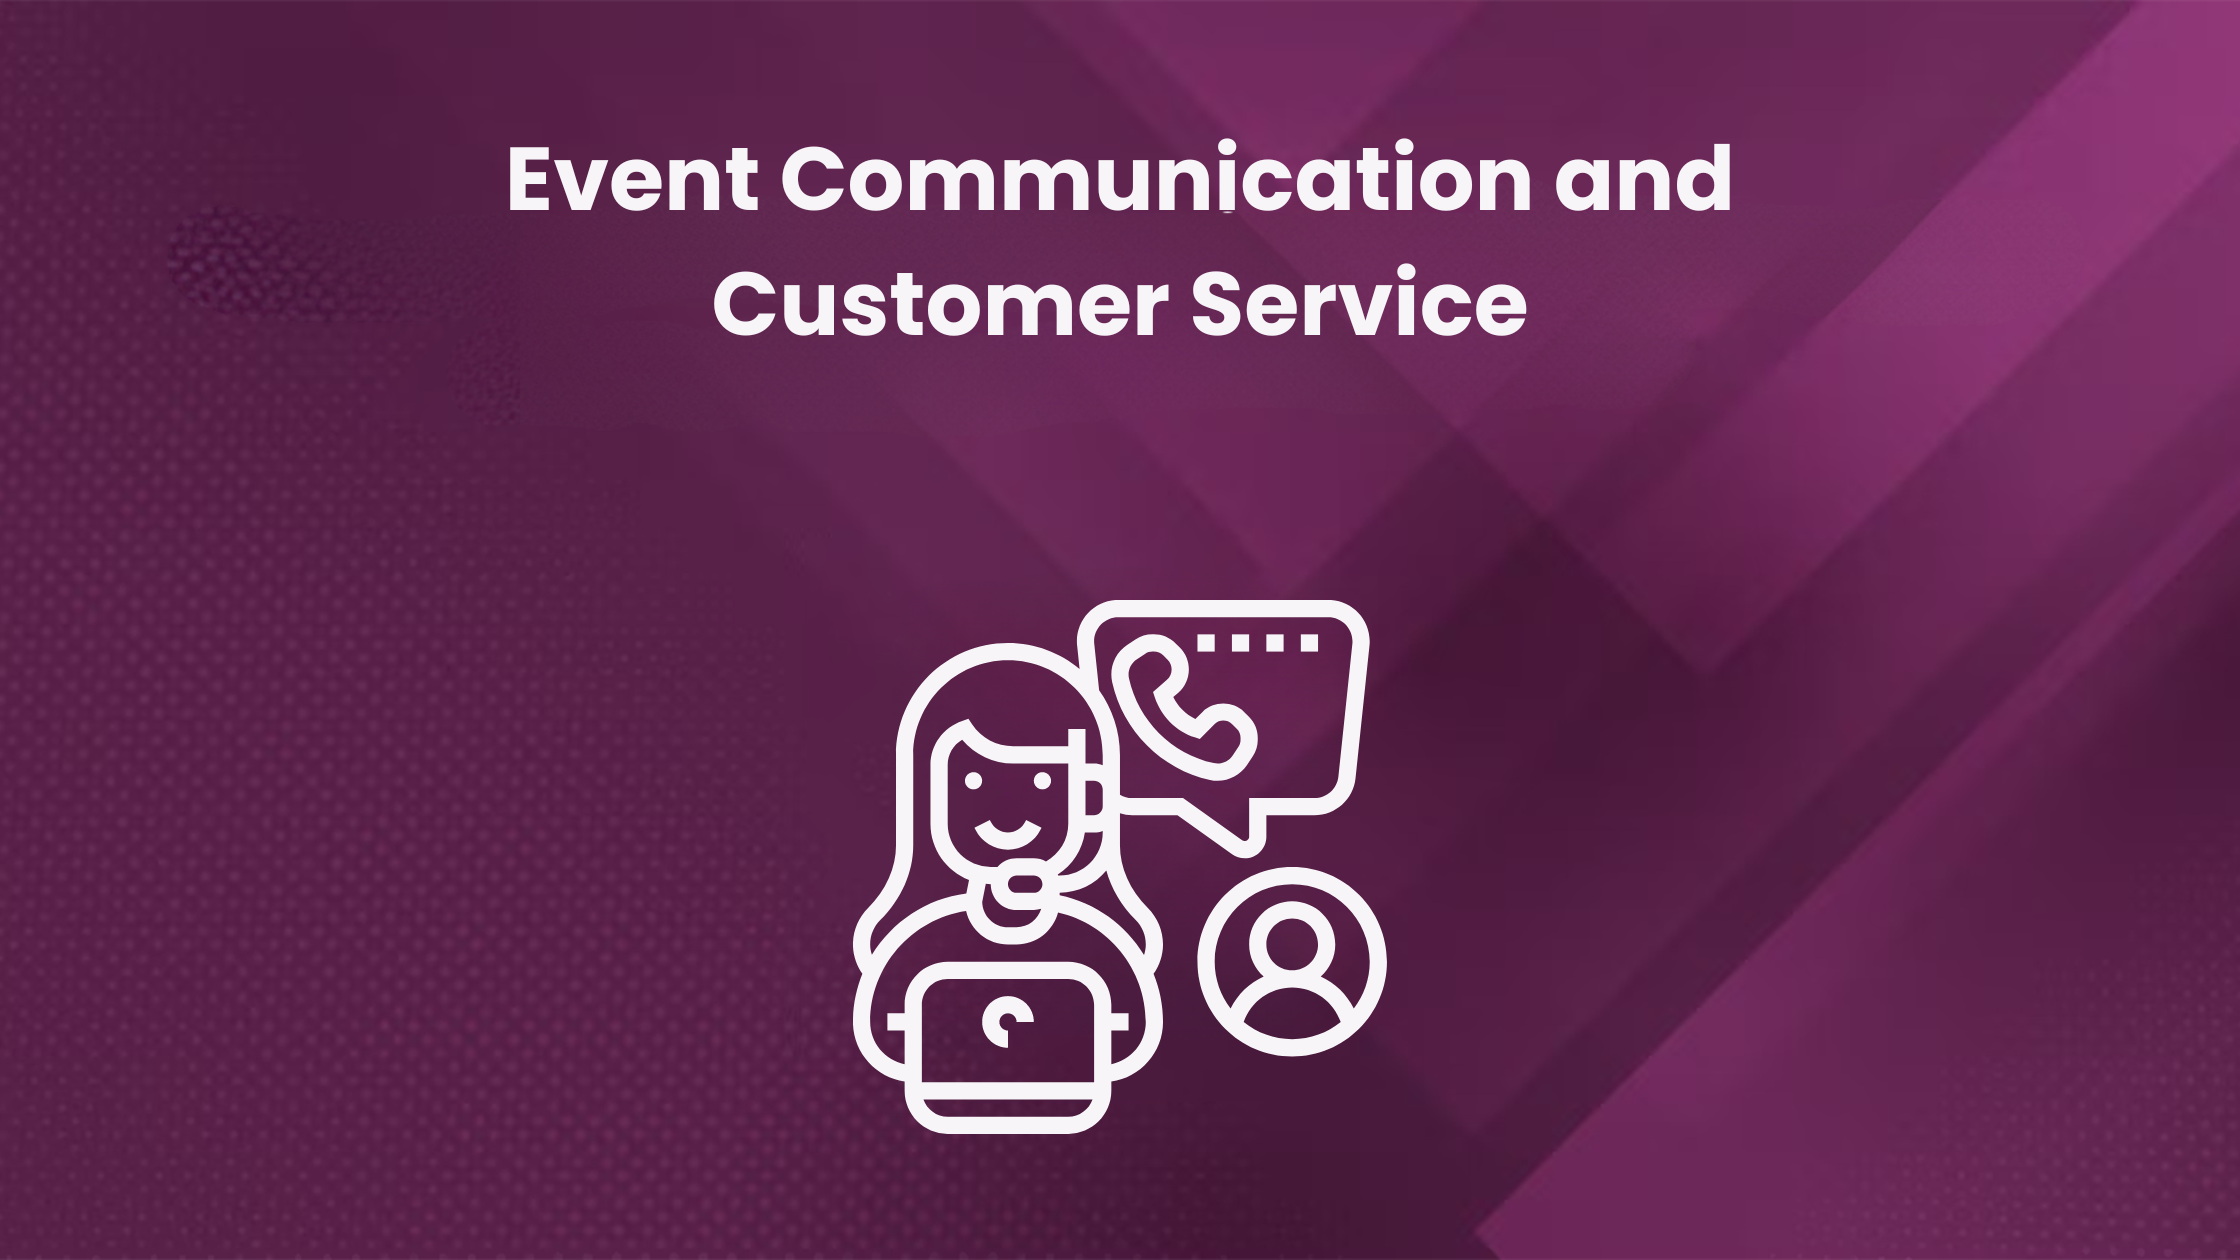 Event communication and customer service